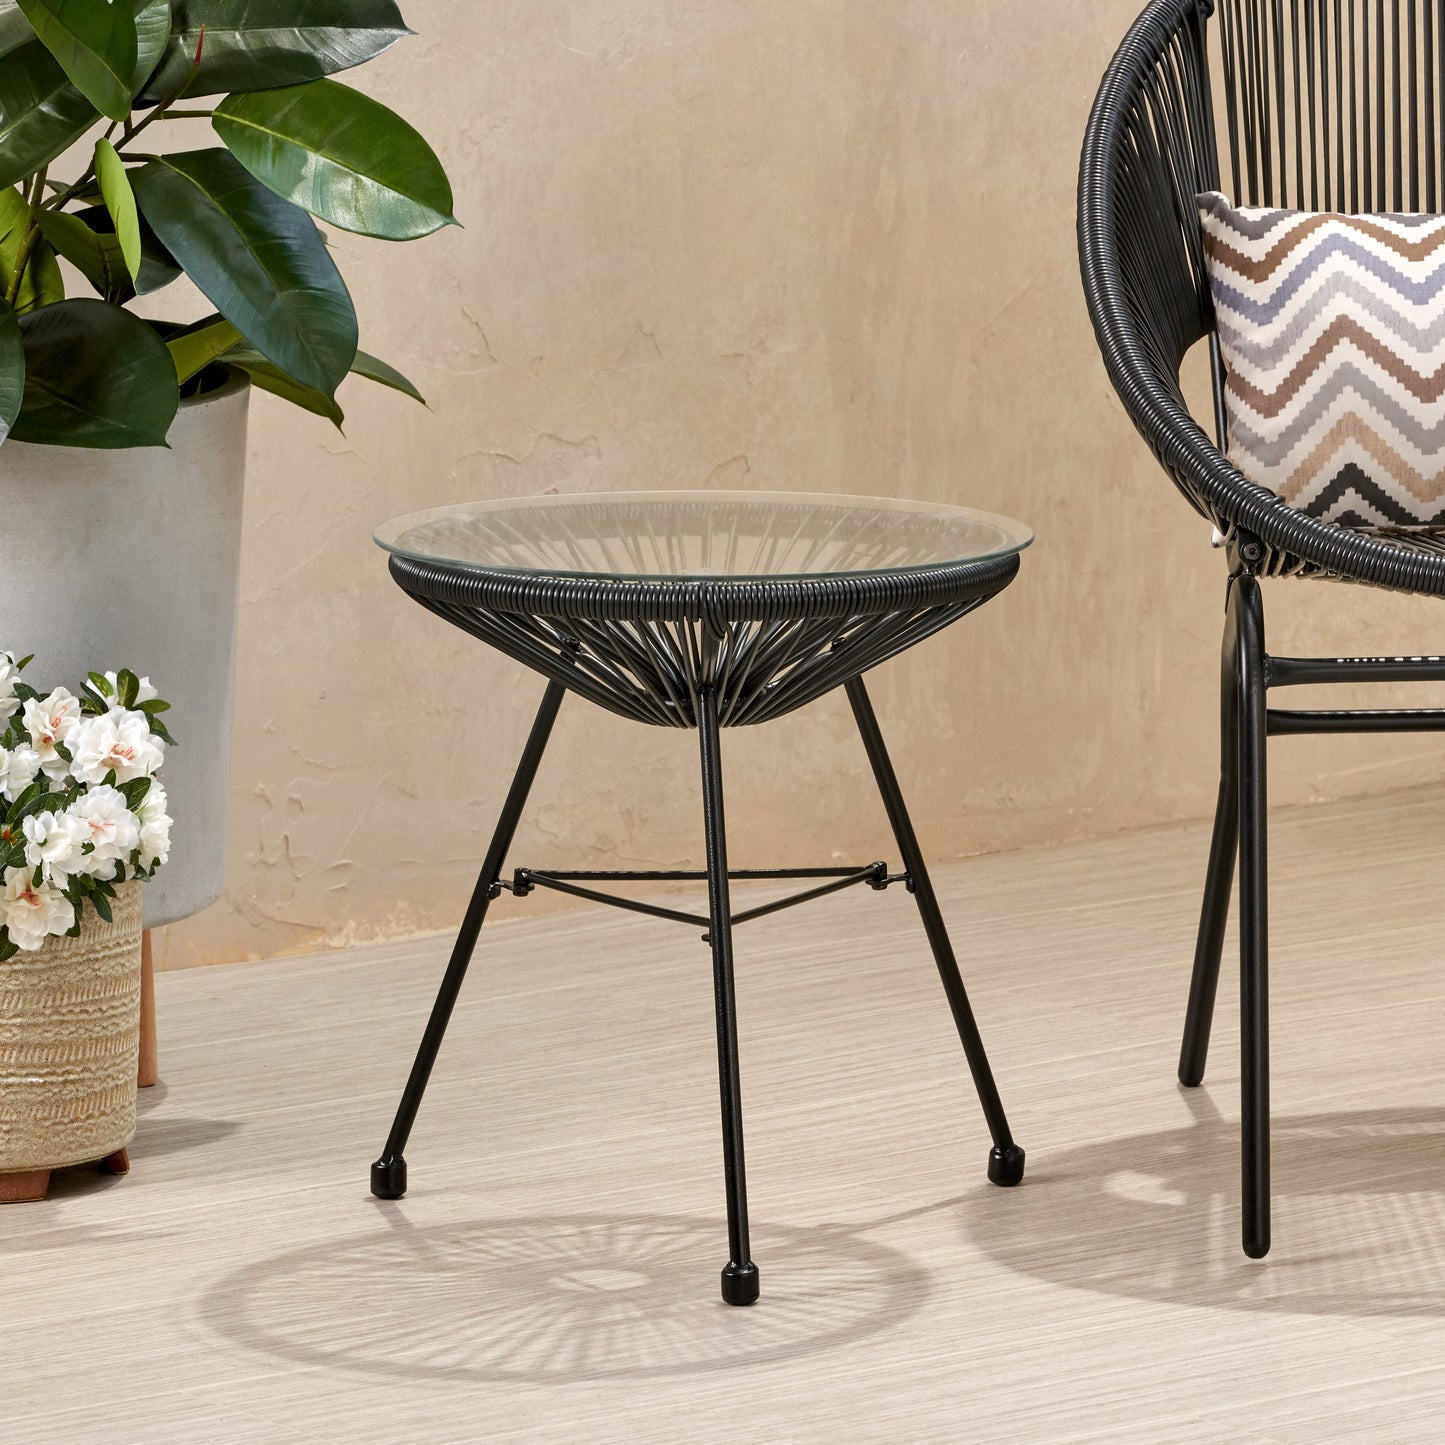 Chrissy Outdoor Modern Faux Rattan Side Table with Tempered Glass Top